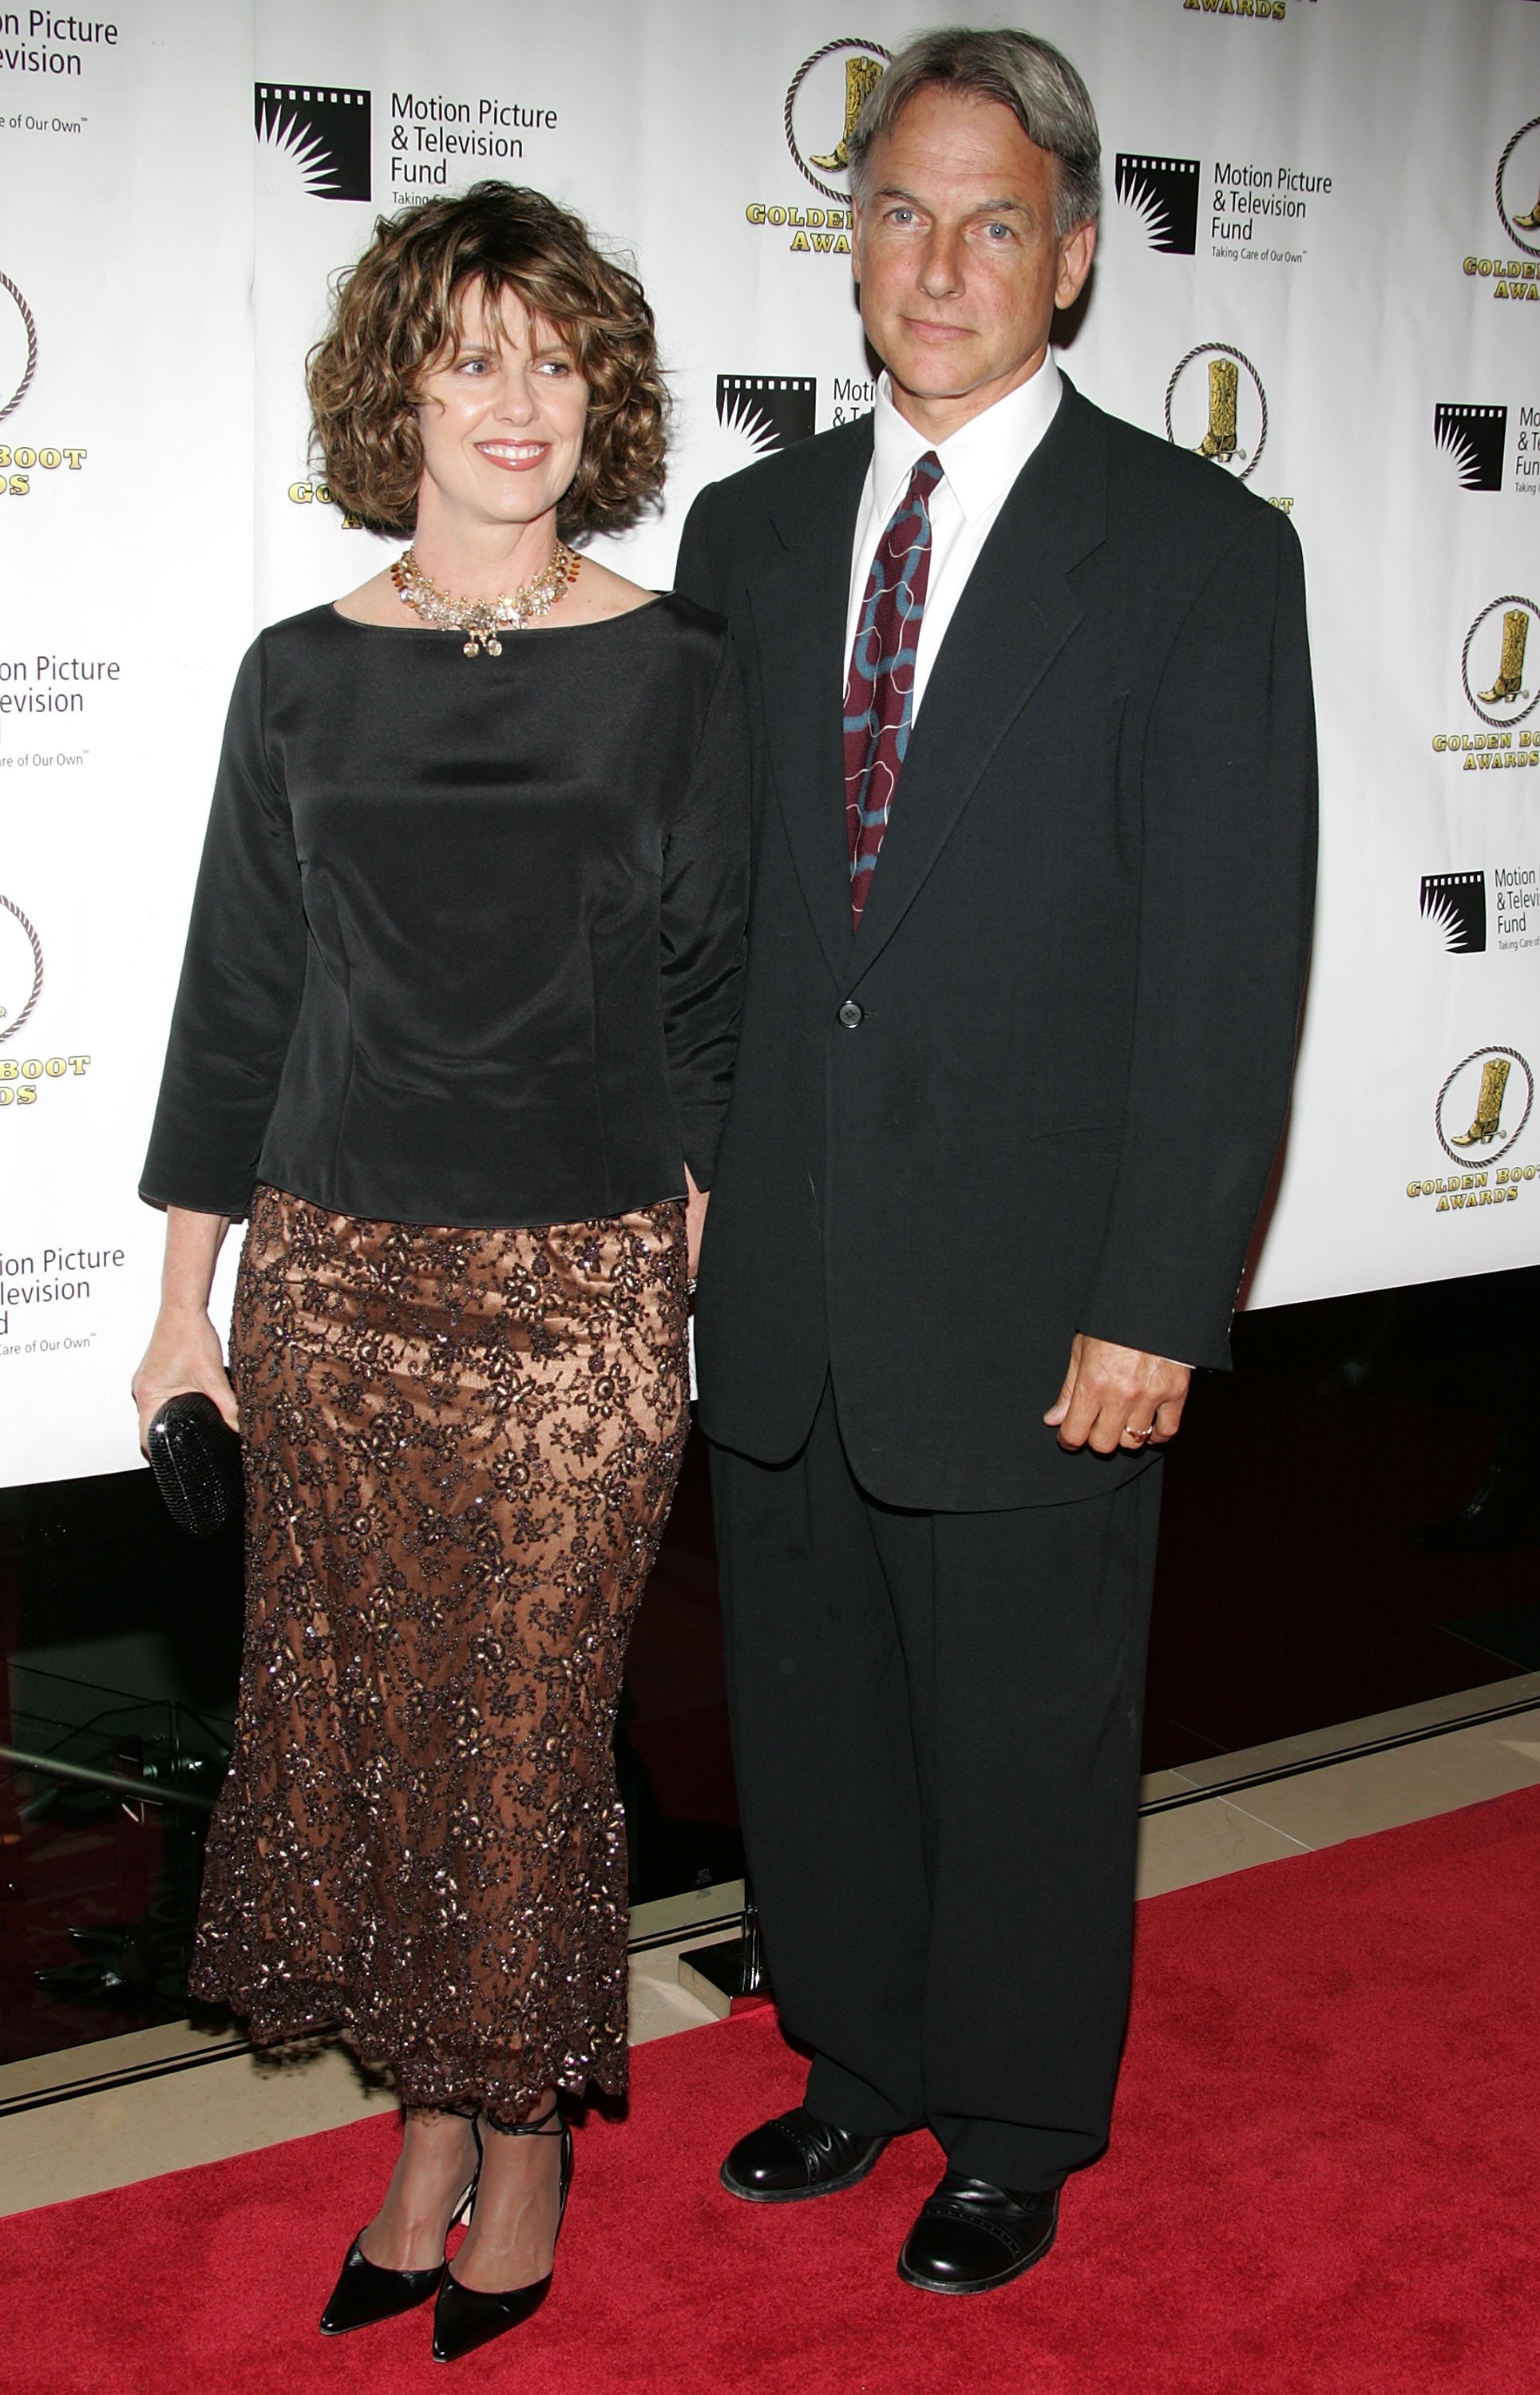  Actor Mark Harmon and wife, actress Pam Dawber, attend the Golden Boot Awards held at the Beverly Hilton Hotel on August 13, 2005 in Beverly Hills, California | Photo: Getty Images